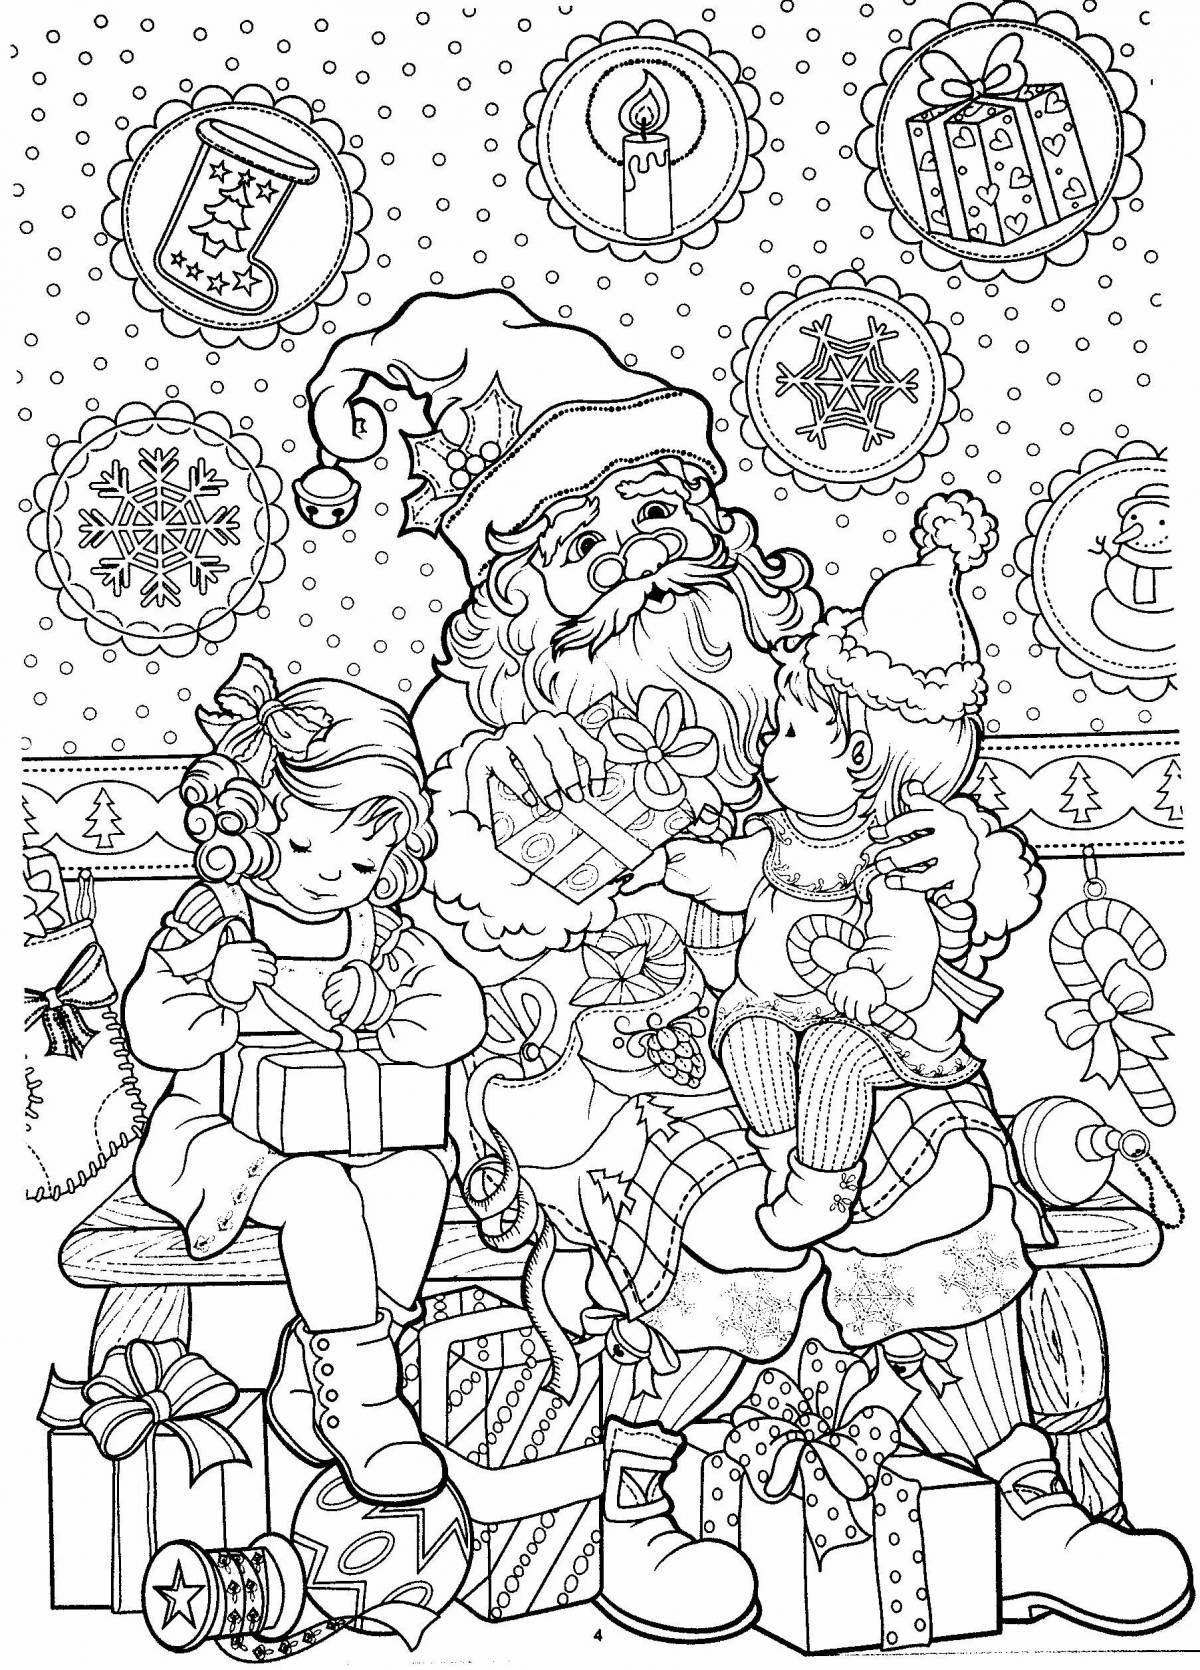 Serendipitous coloring page stress relief christmas